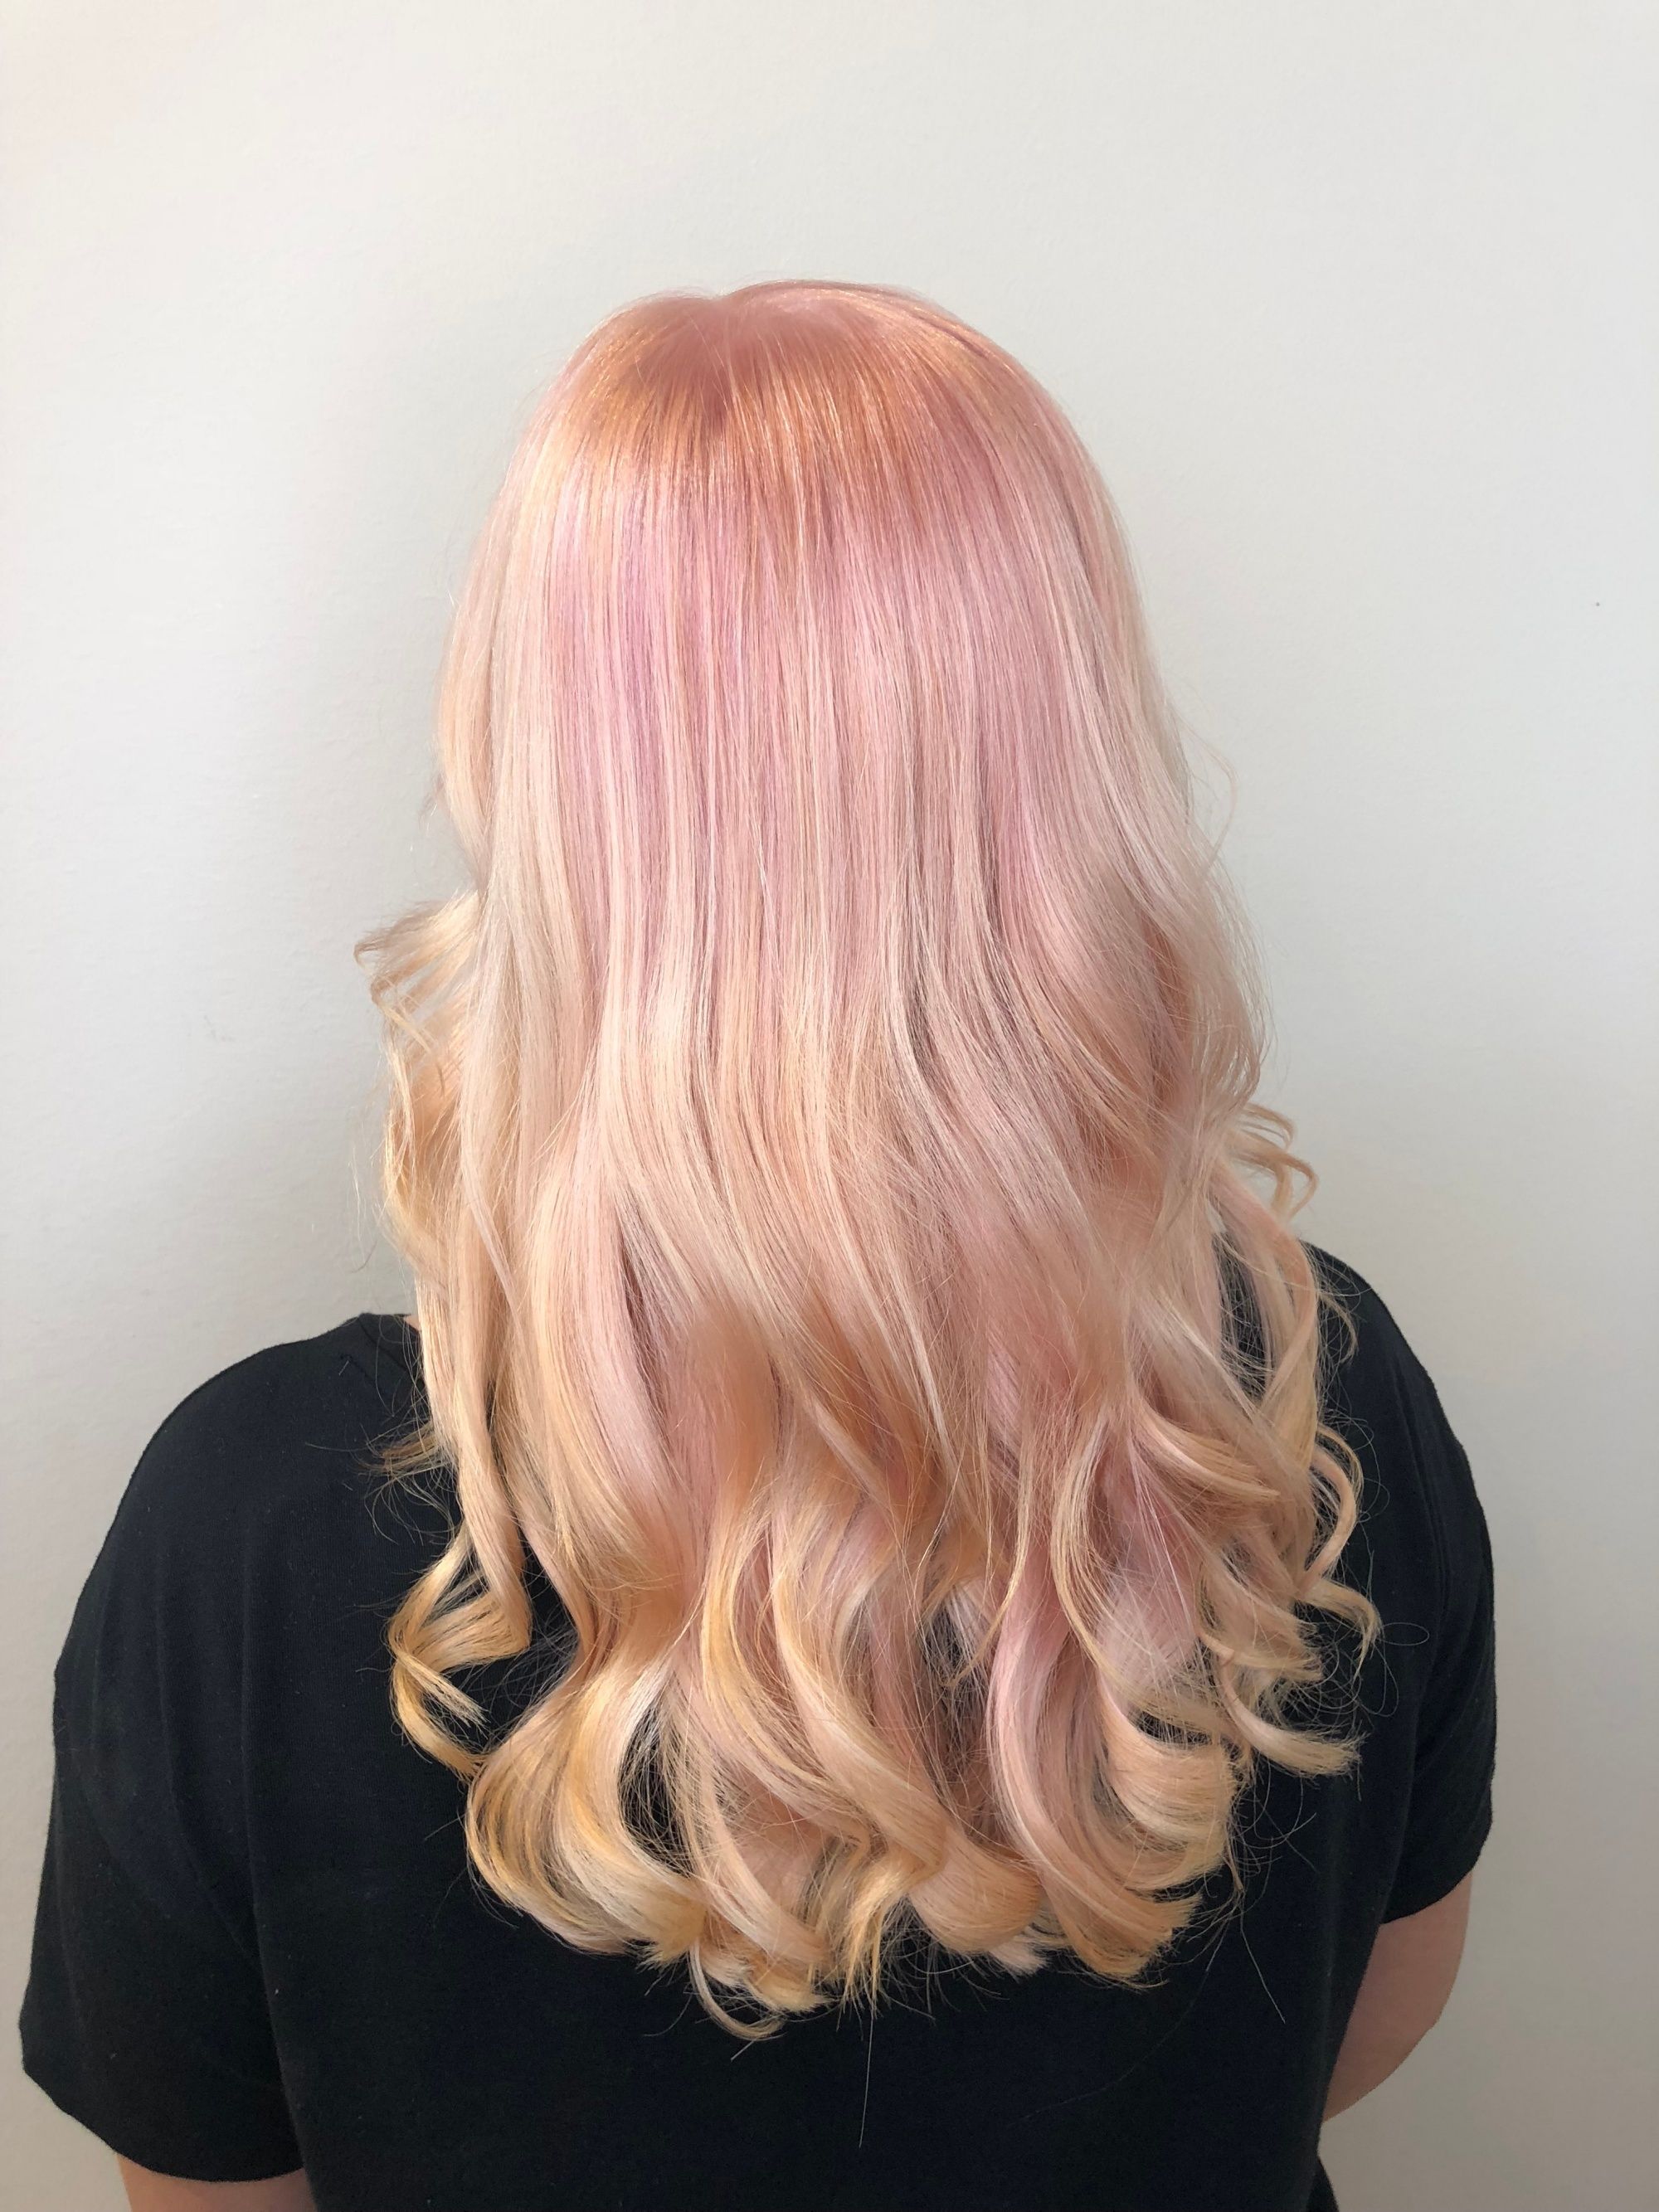 Neon Peach Hair Ideas | How To Get The Juicy Look.